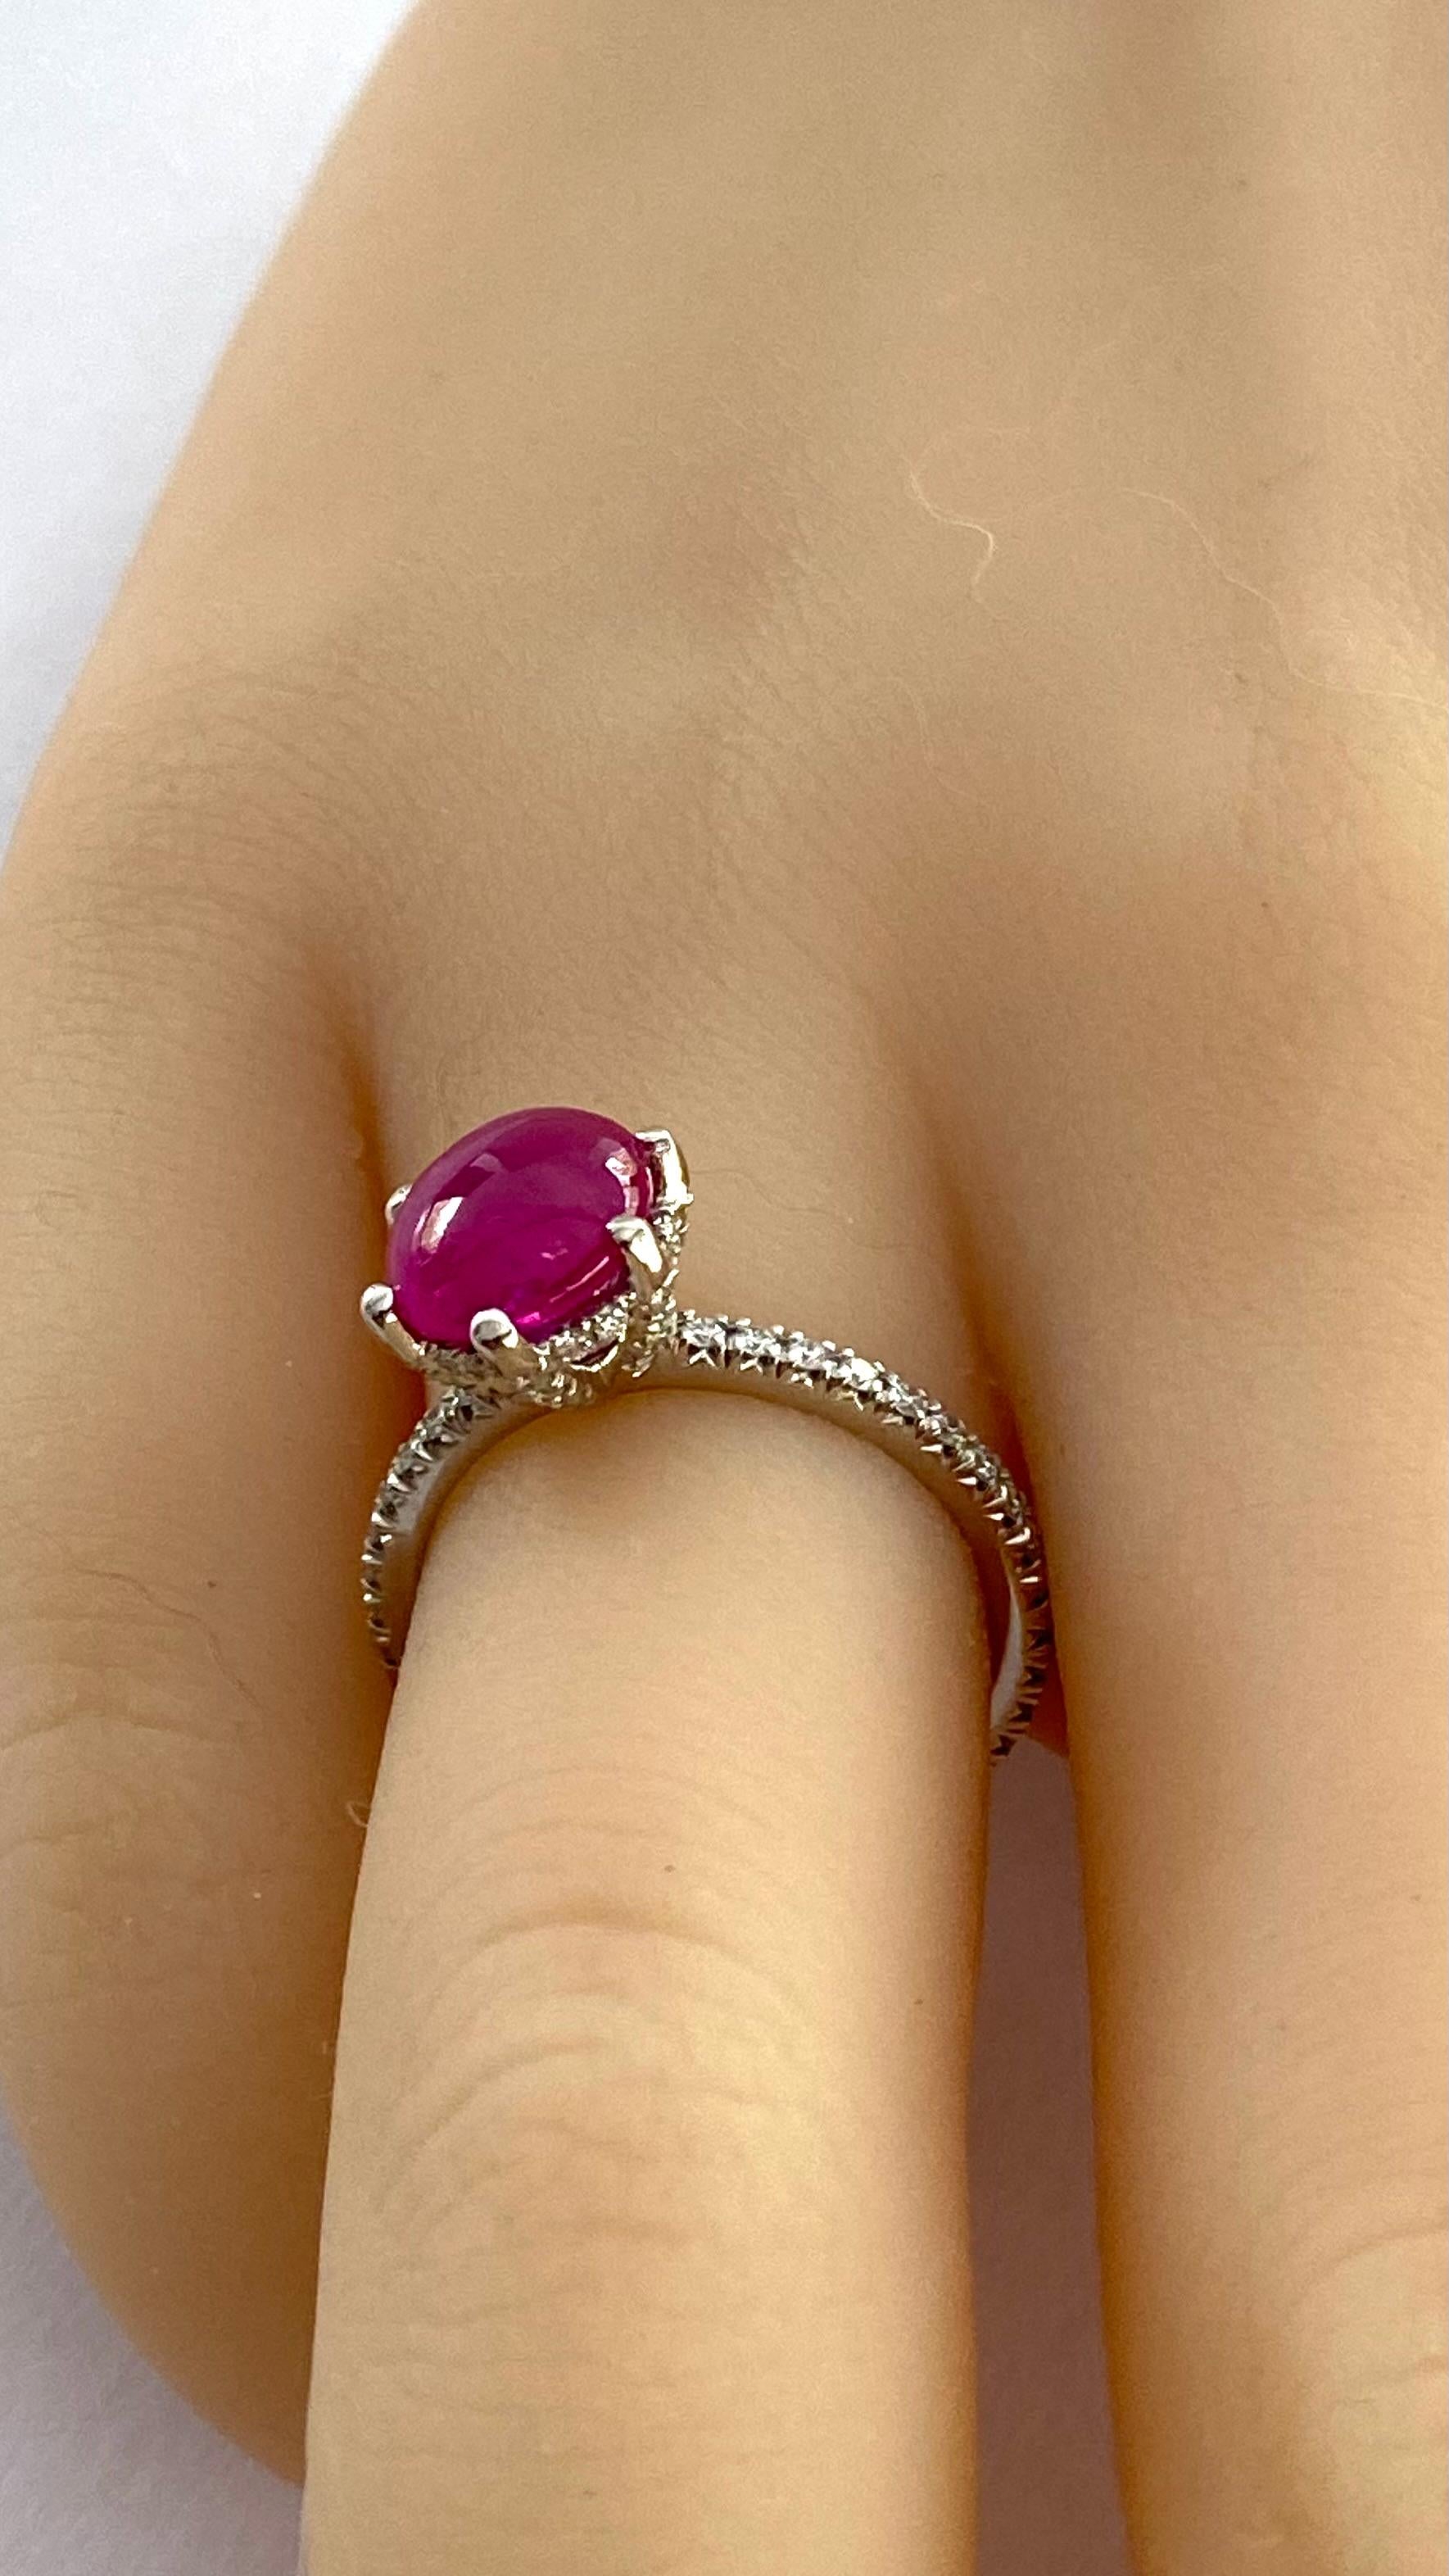 Exquisite Vintage Blue Nile Platinum Diamond and Ruby 2.75 Carat Engagement Ring For Sale 7